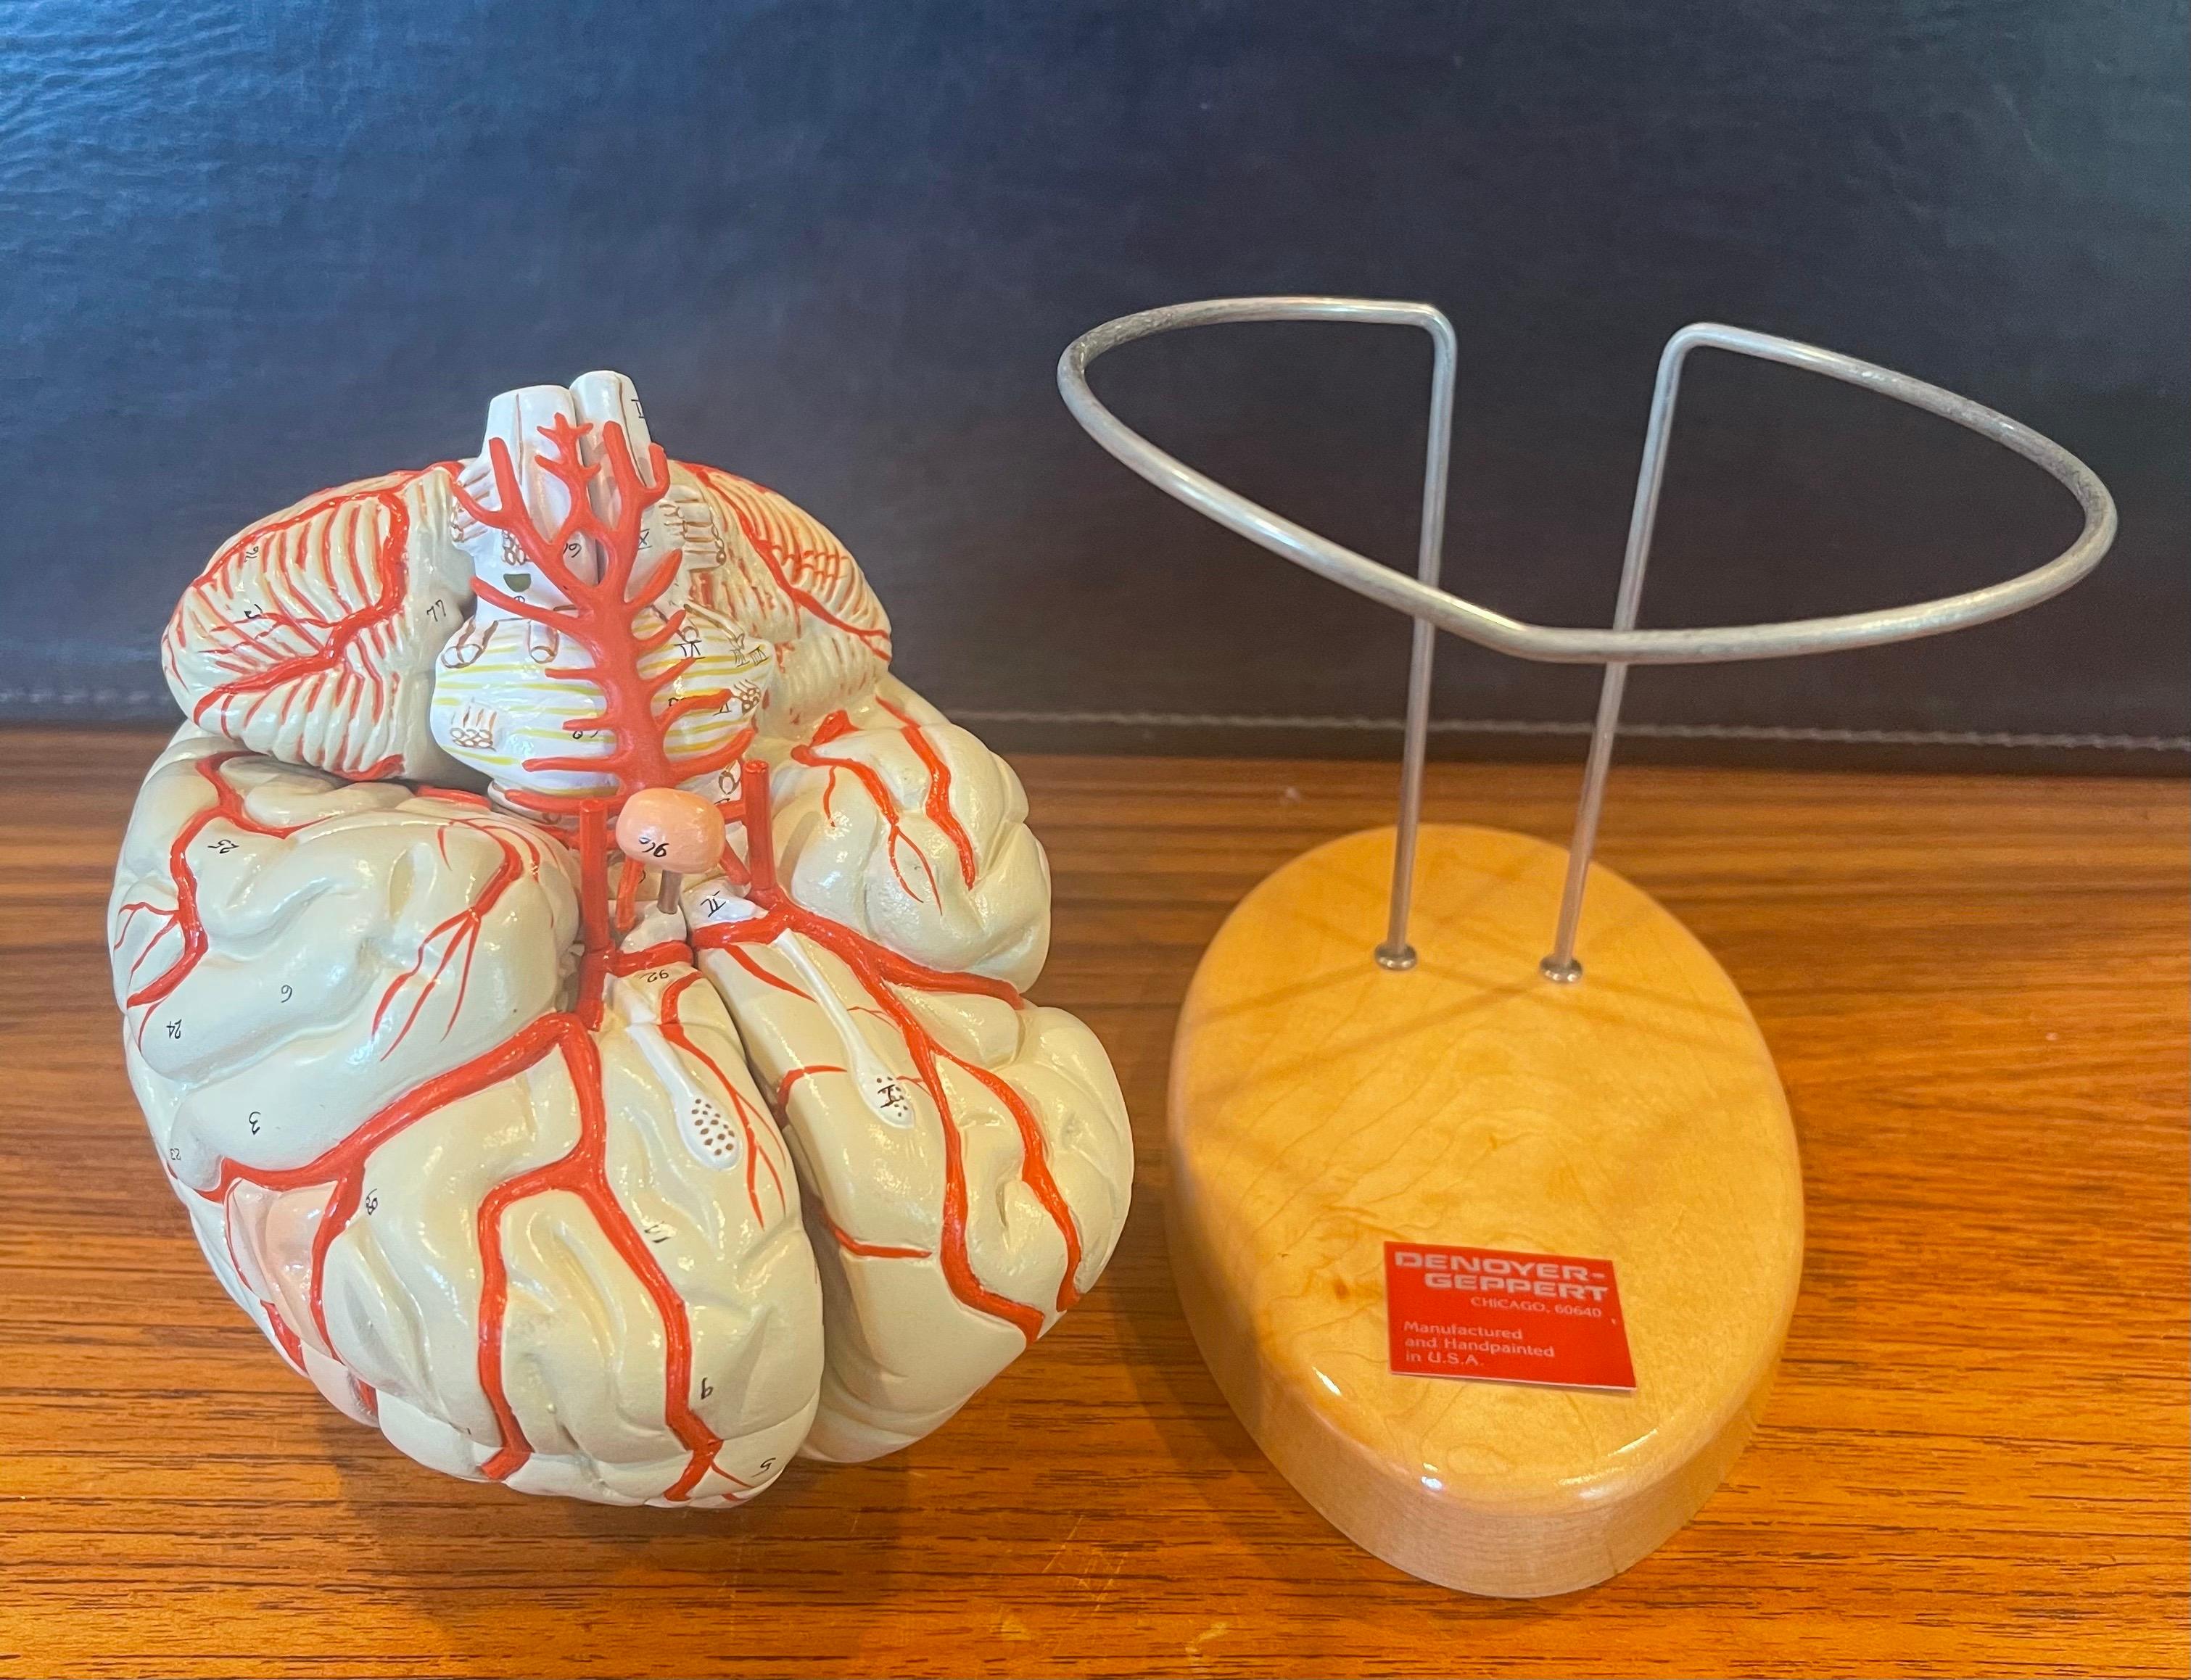 Vintage Hand-Painted Brain Model by Denoyer Geppert In Good Condition For Sale In San Diego, CA